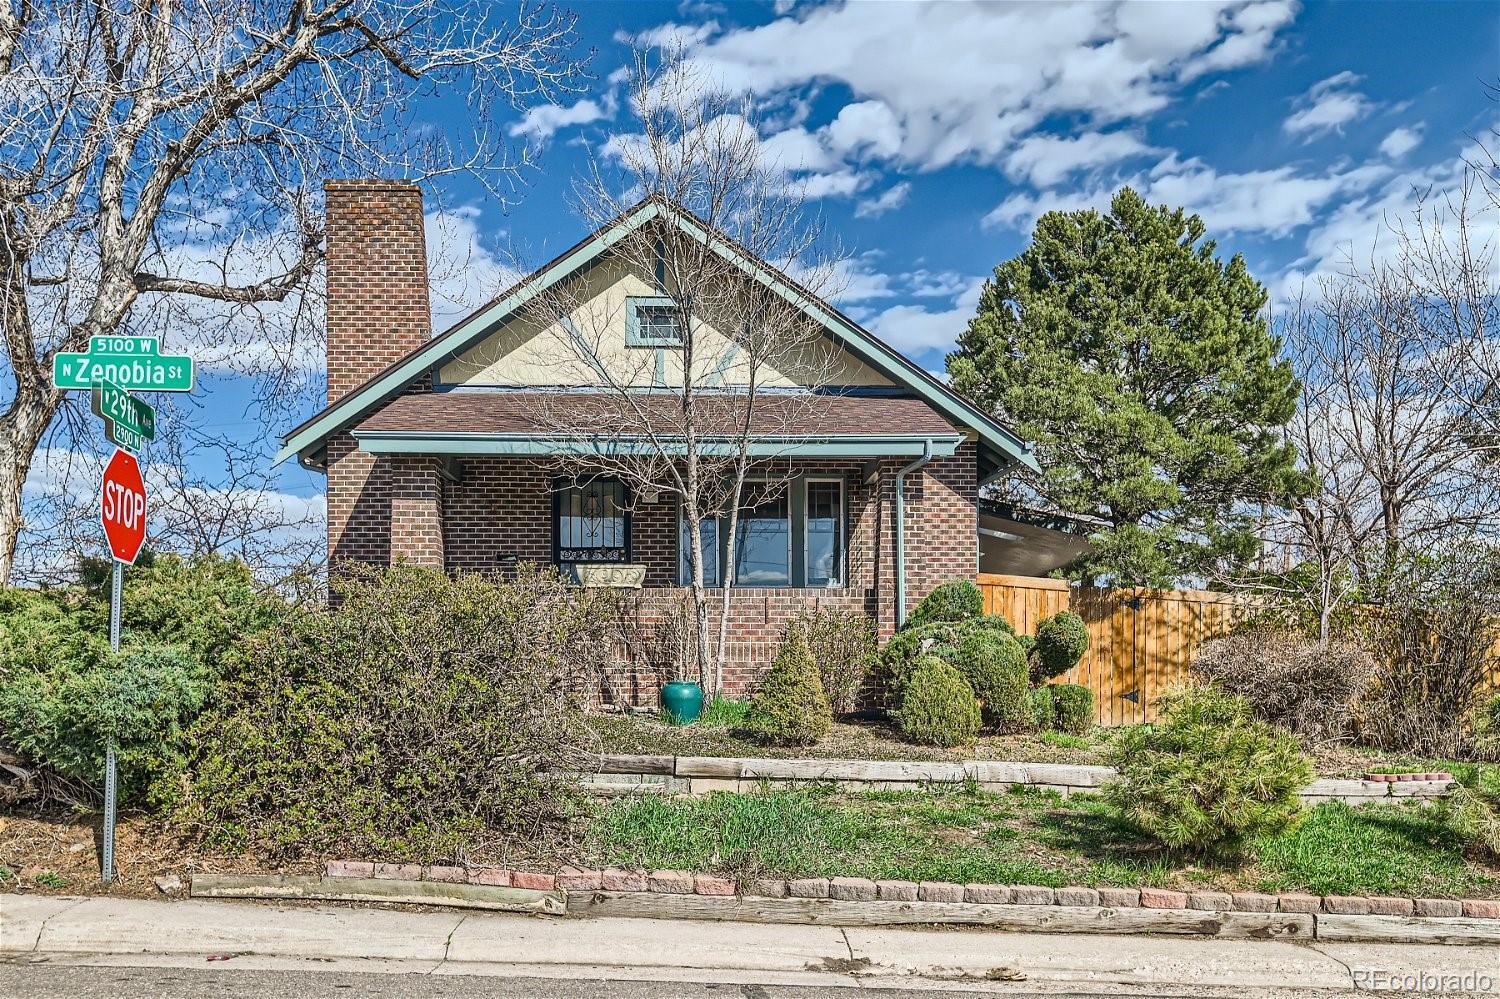 Photo one of 5038 W 29Th Ave Denver CO 80212 | MLS 3106136